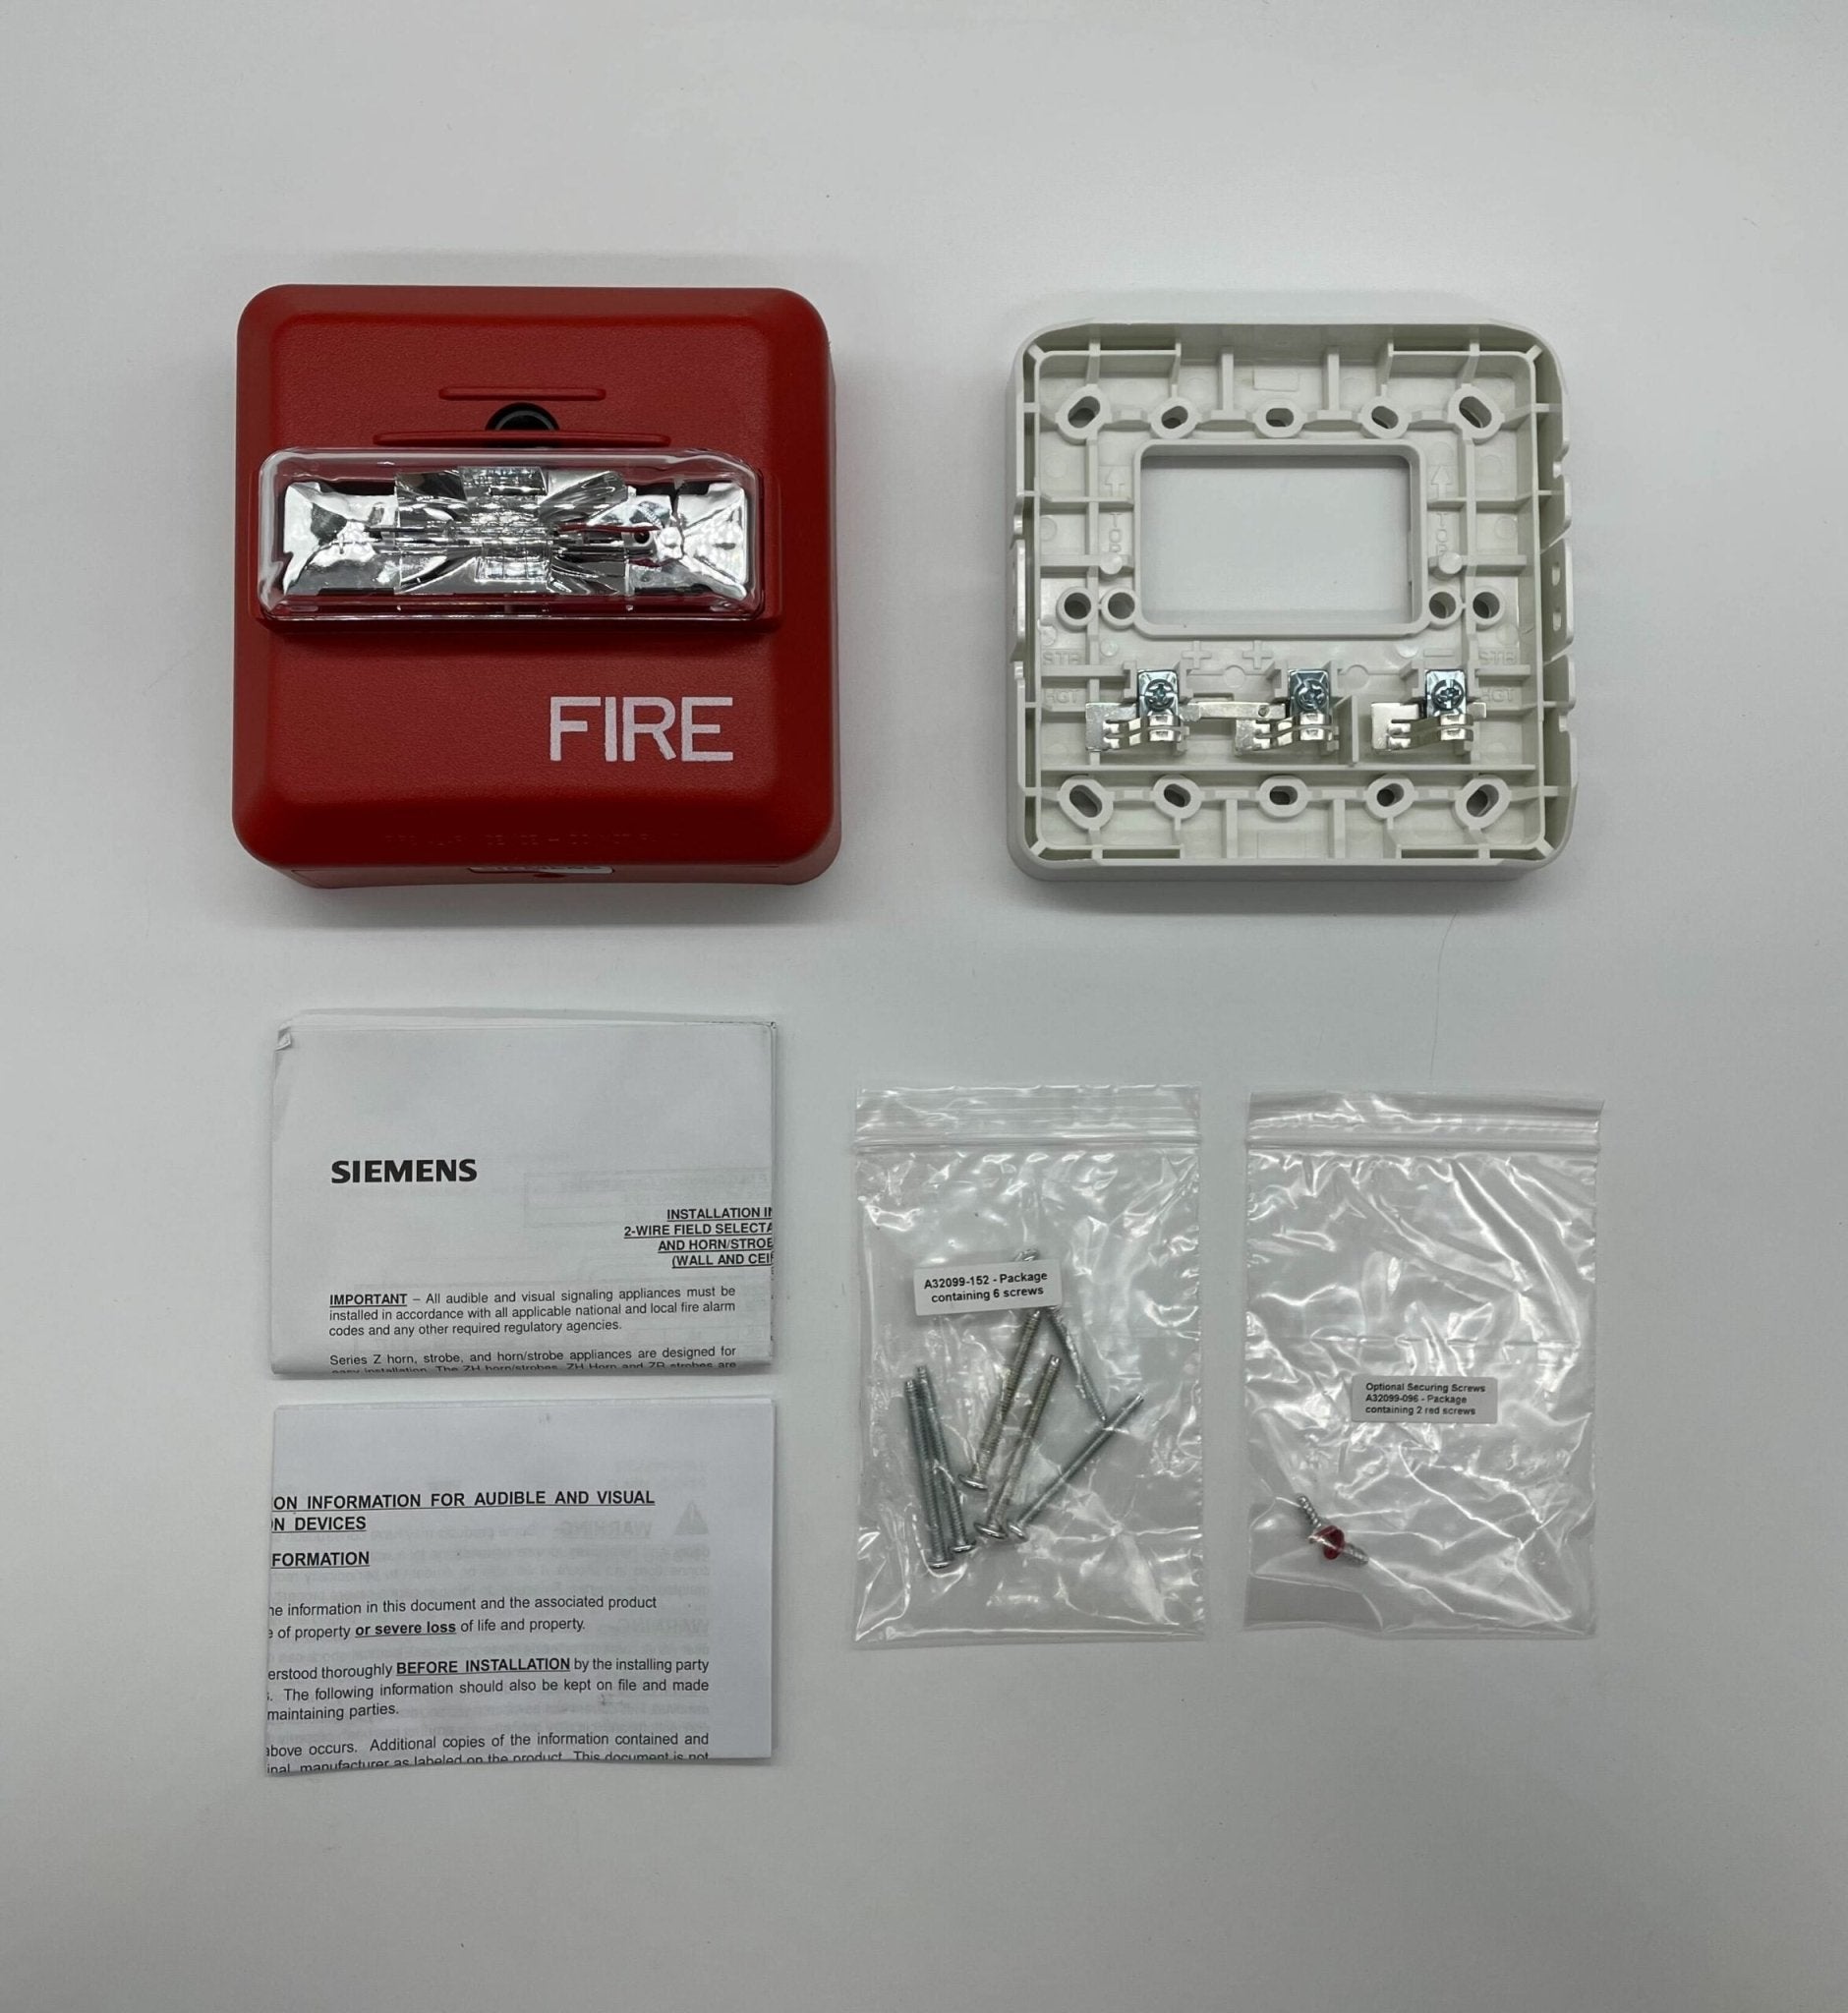 Siemens ZH-MC-R Multi Candela Horn Strobe For Wall Mounting - The Fire Alarm Supplier